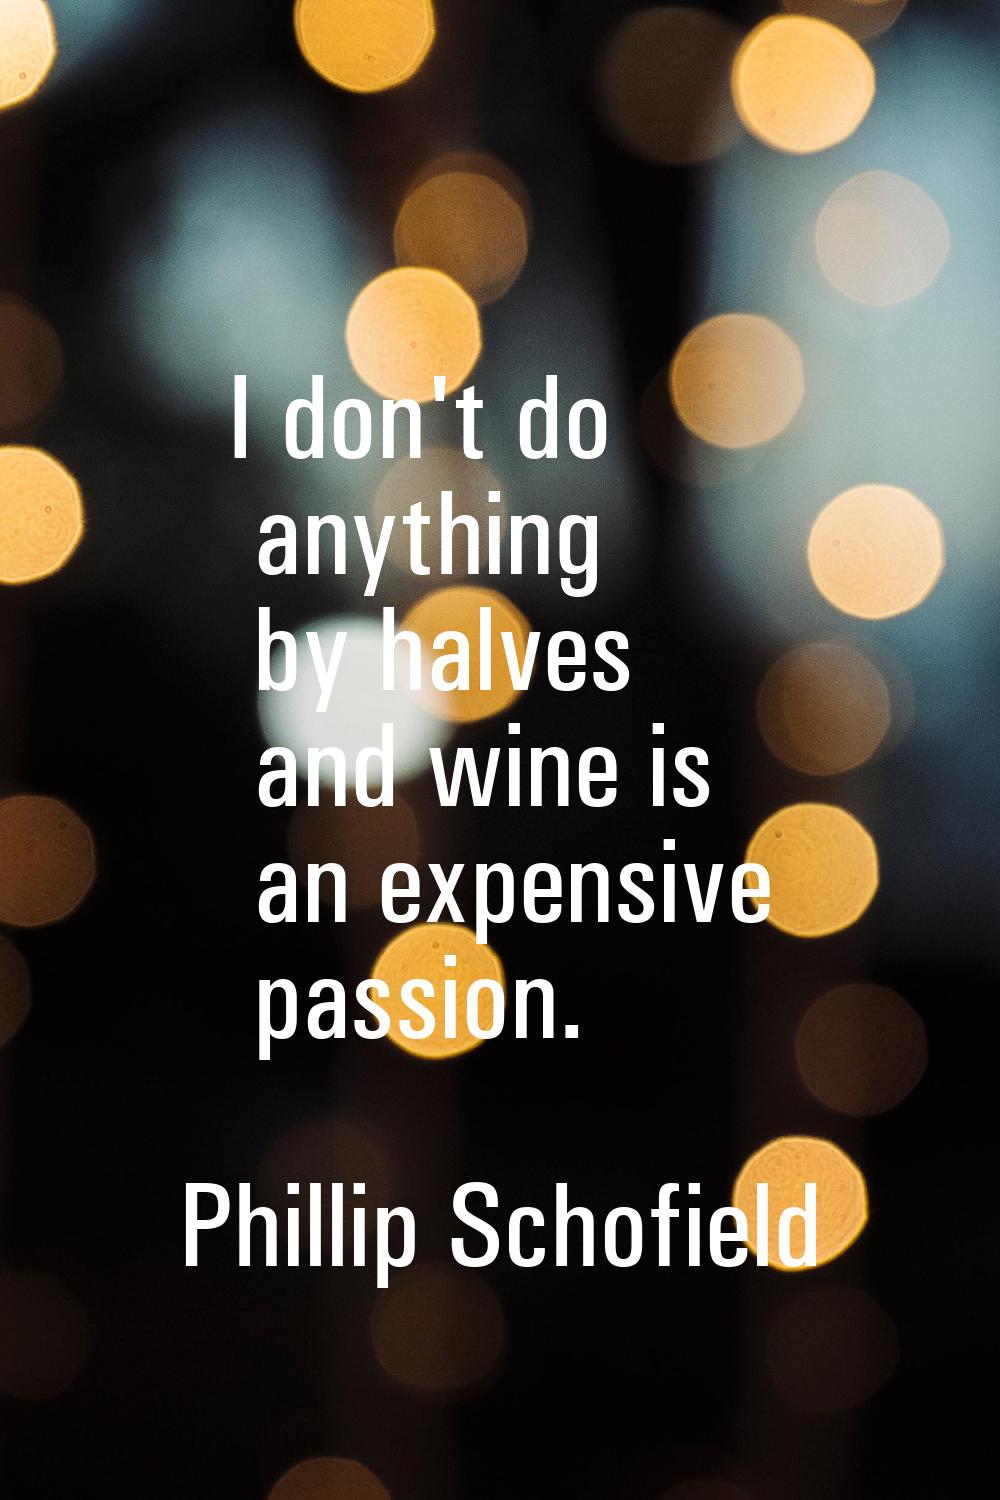 I don't do anything by halves and wine is an expensive passion.